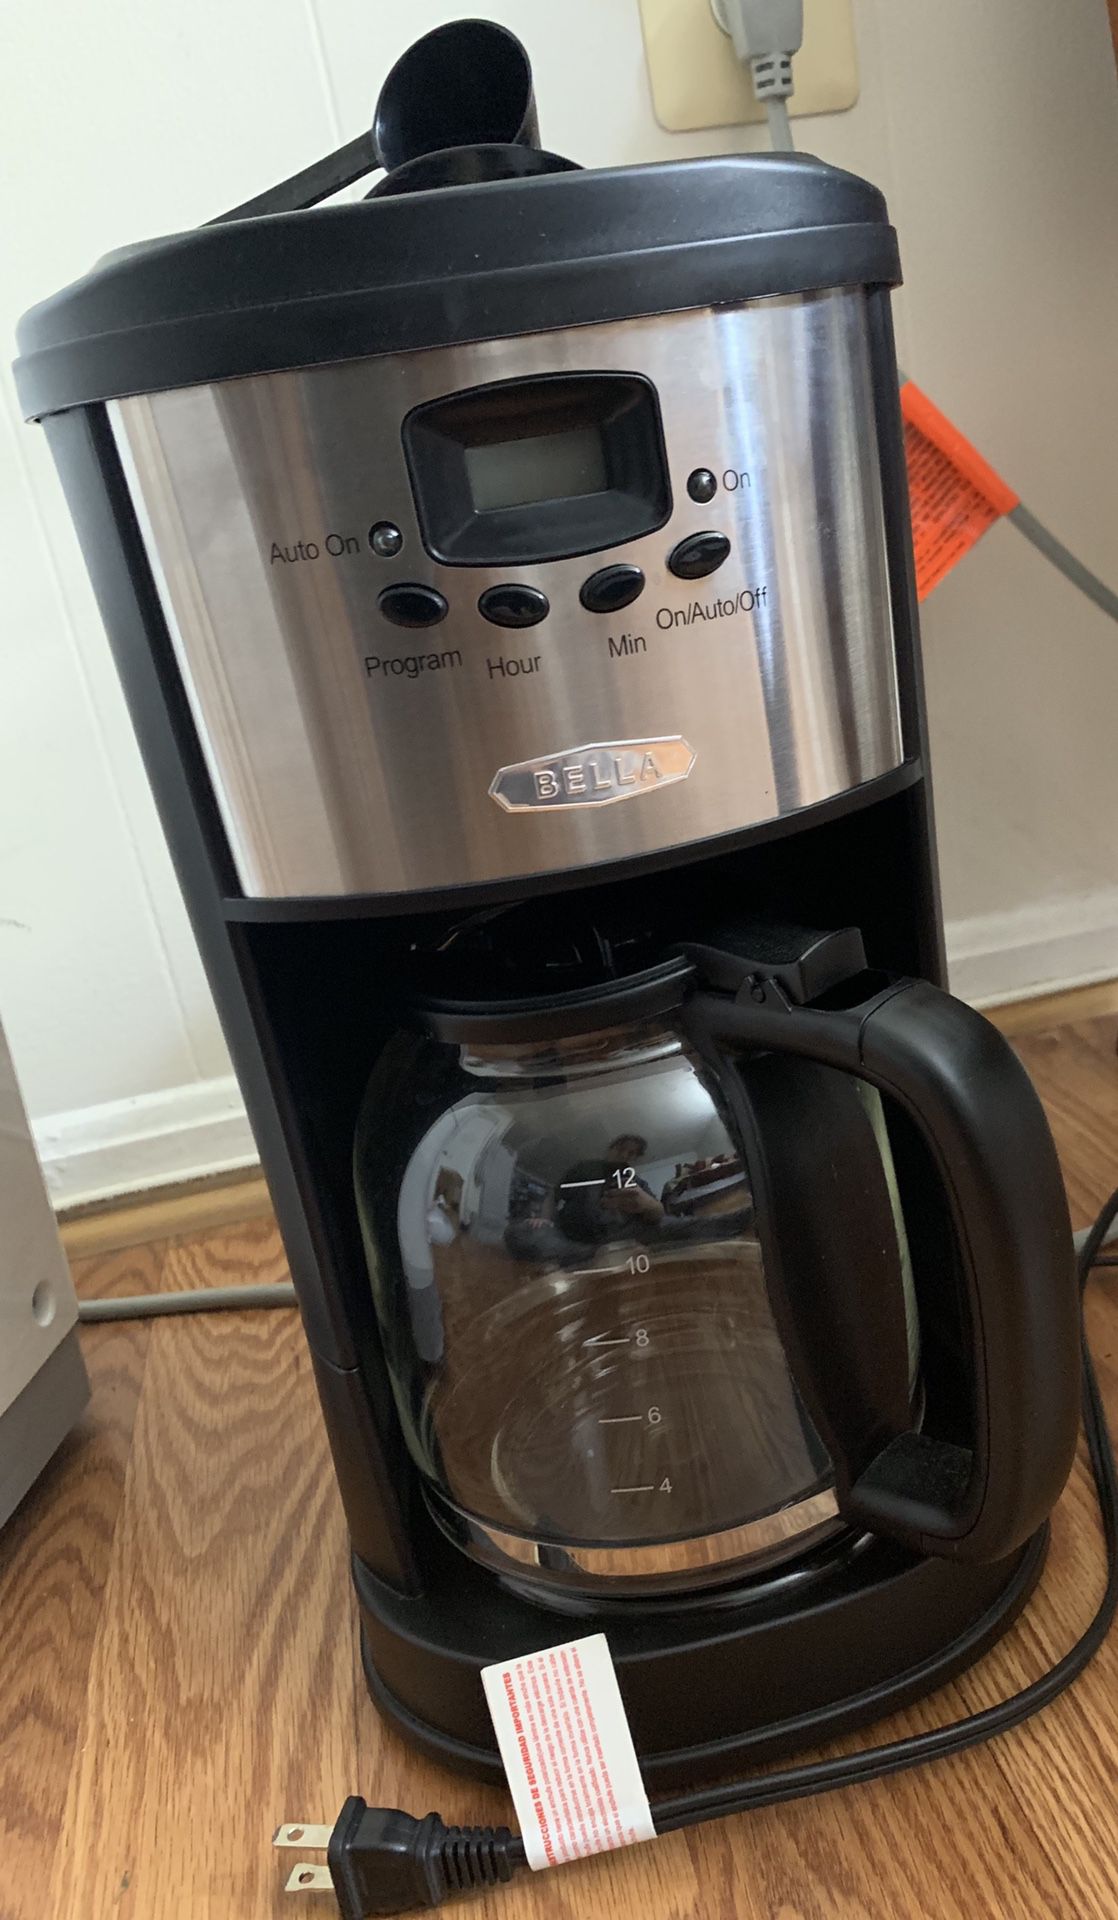 Bella Coffee Maker with Reusable Filter